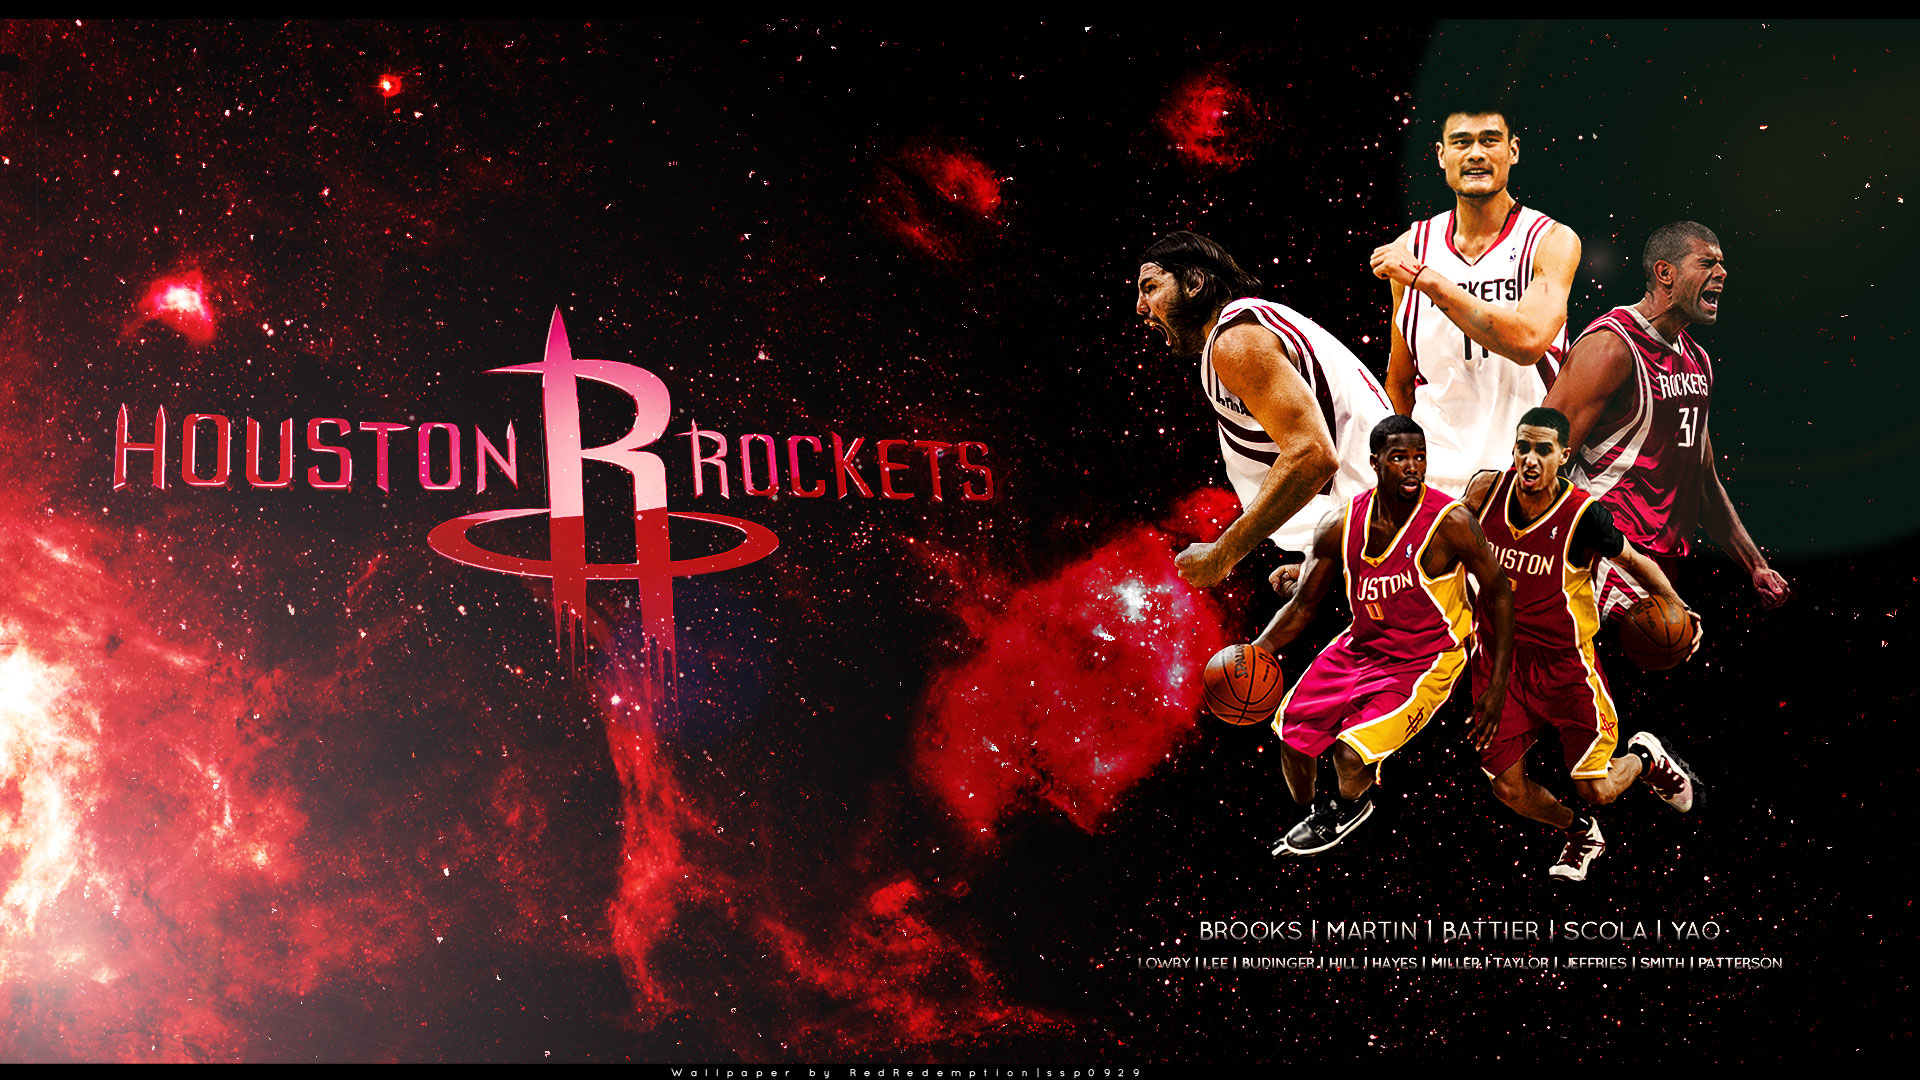 Rockets Wallpaper - NBA NEW THE OFFICIAL SITE OF THE HOUSTON ROCKETS